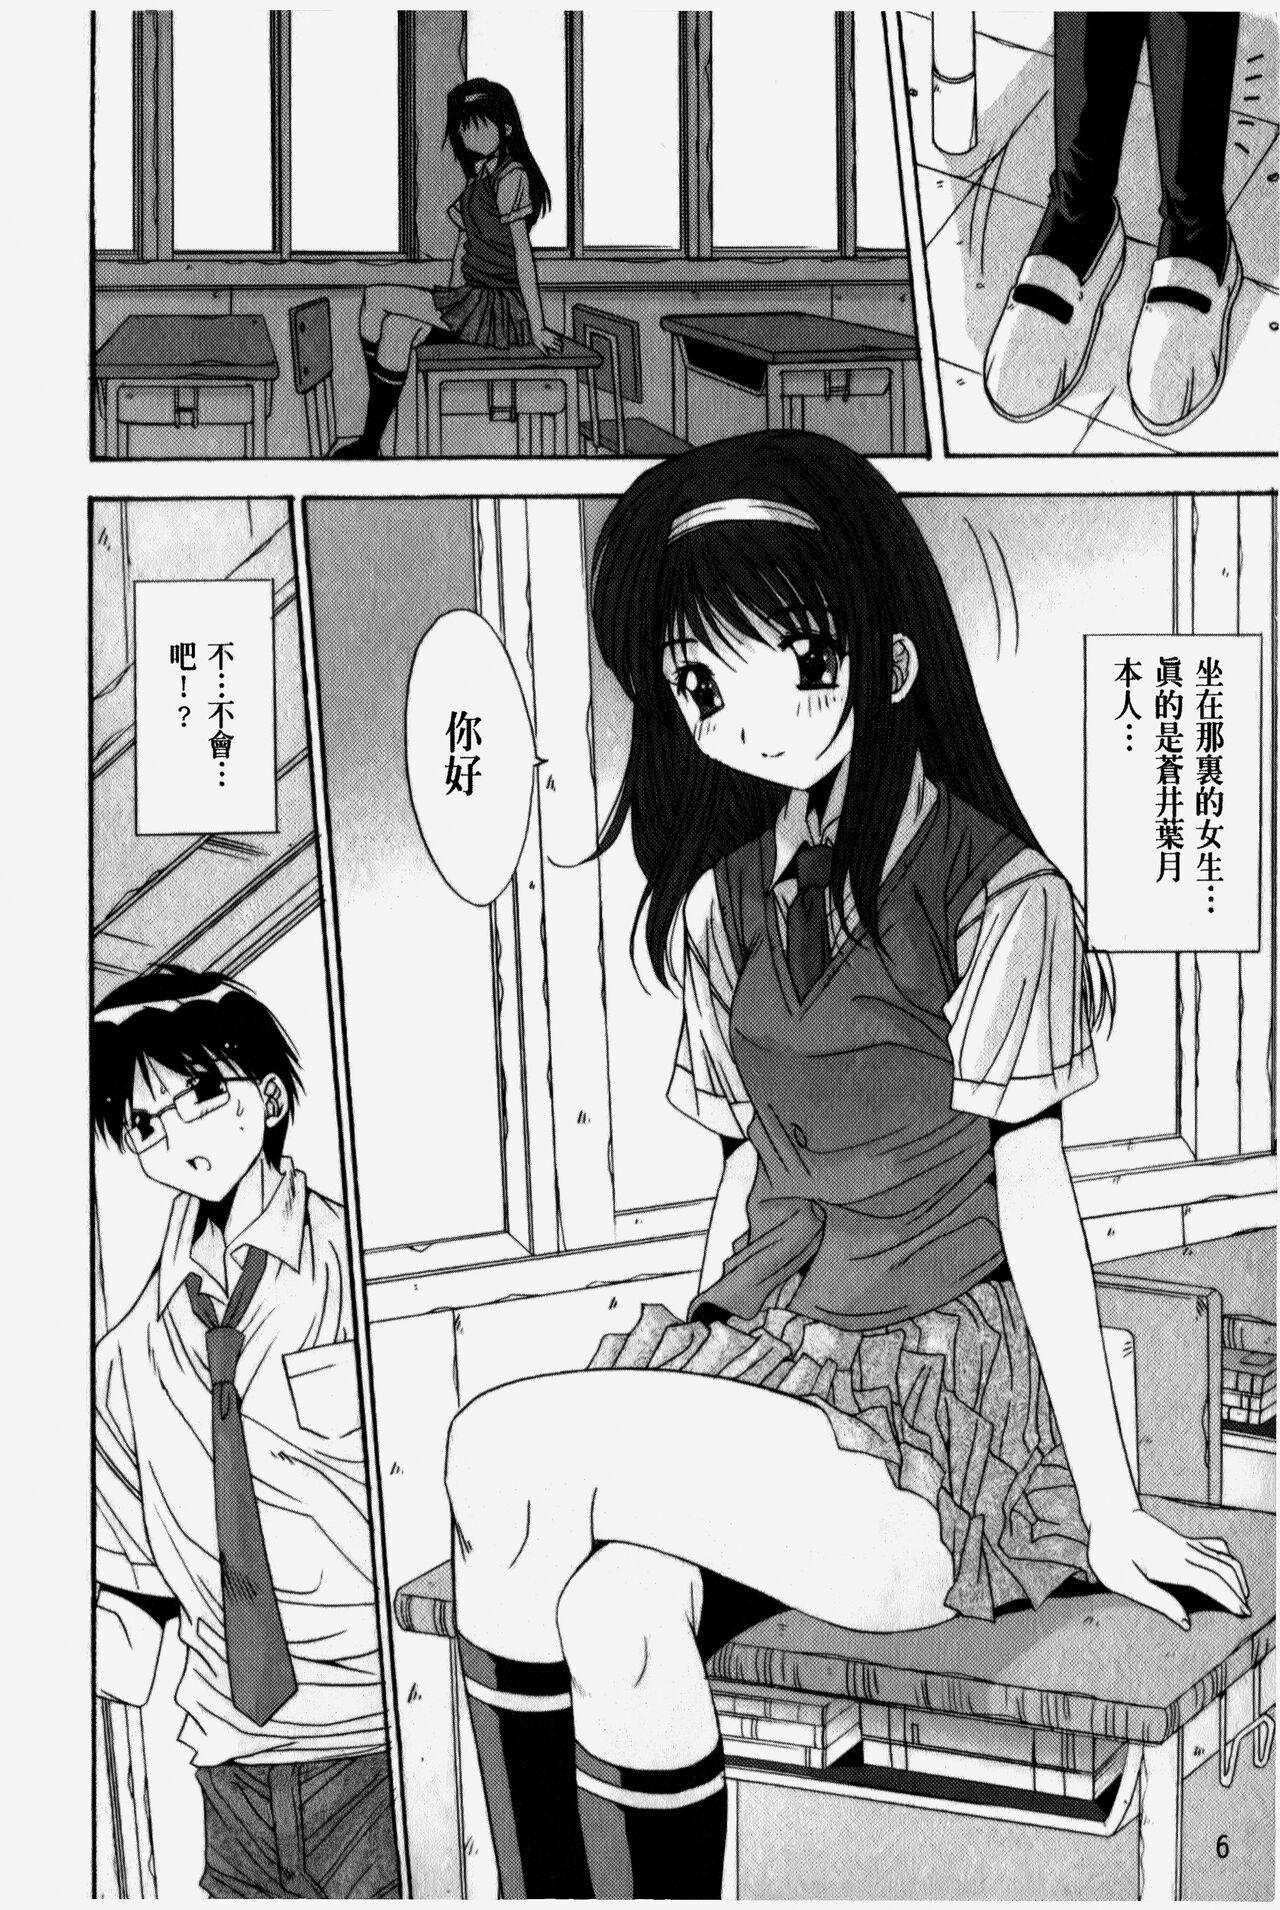 Licking Pussy Kare to Kanojo no Jijou - Boy Meets Girl | 男友與女友之間的情事 Roughsex - Page 9